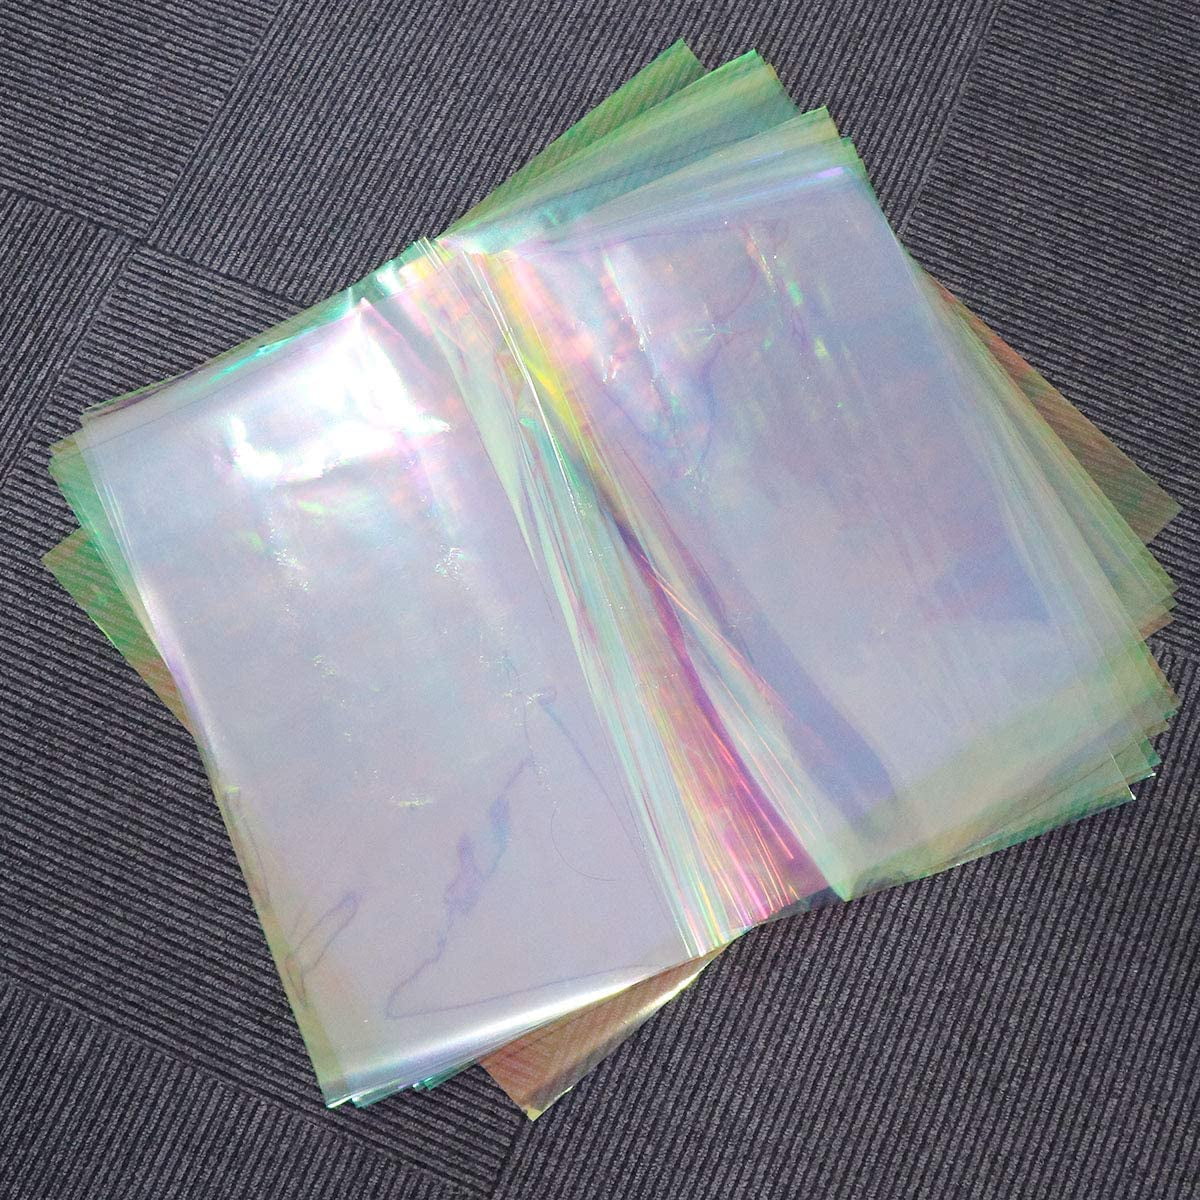 10pcs Flower Packaging Papers Iridescent Film Cellophane Wrapping Gifts 60x50cm 